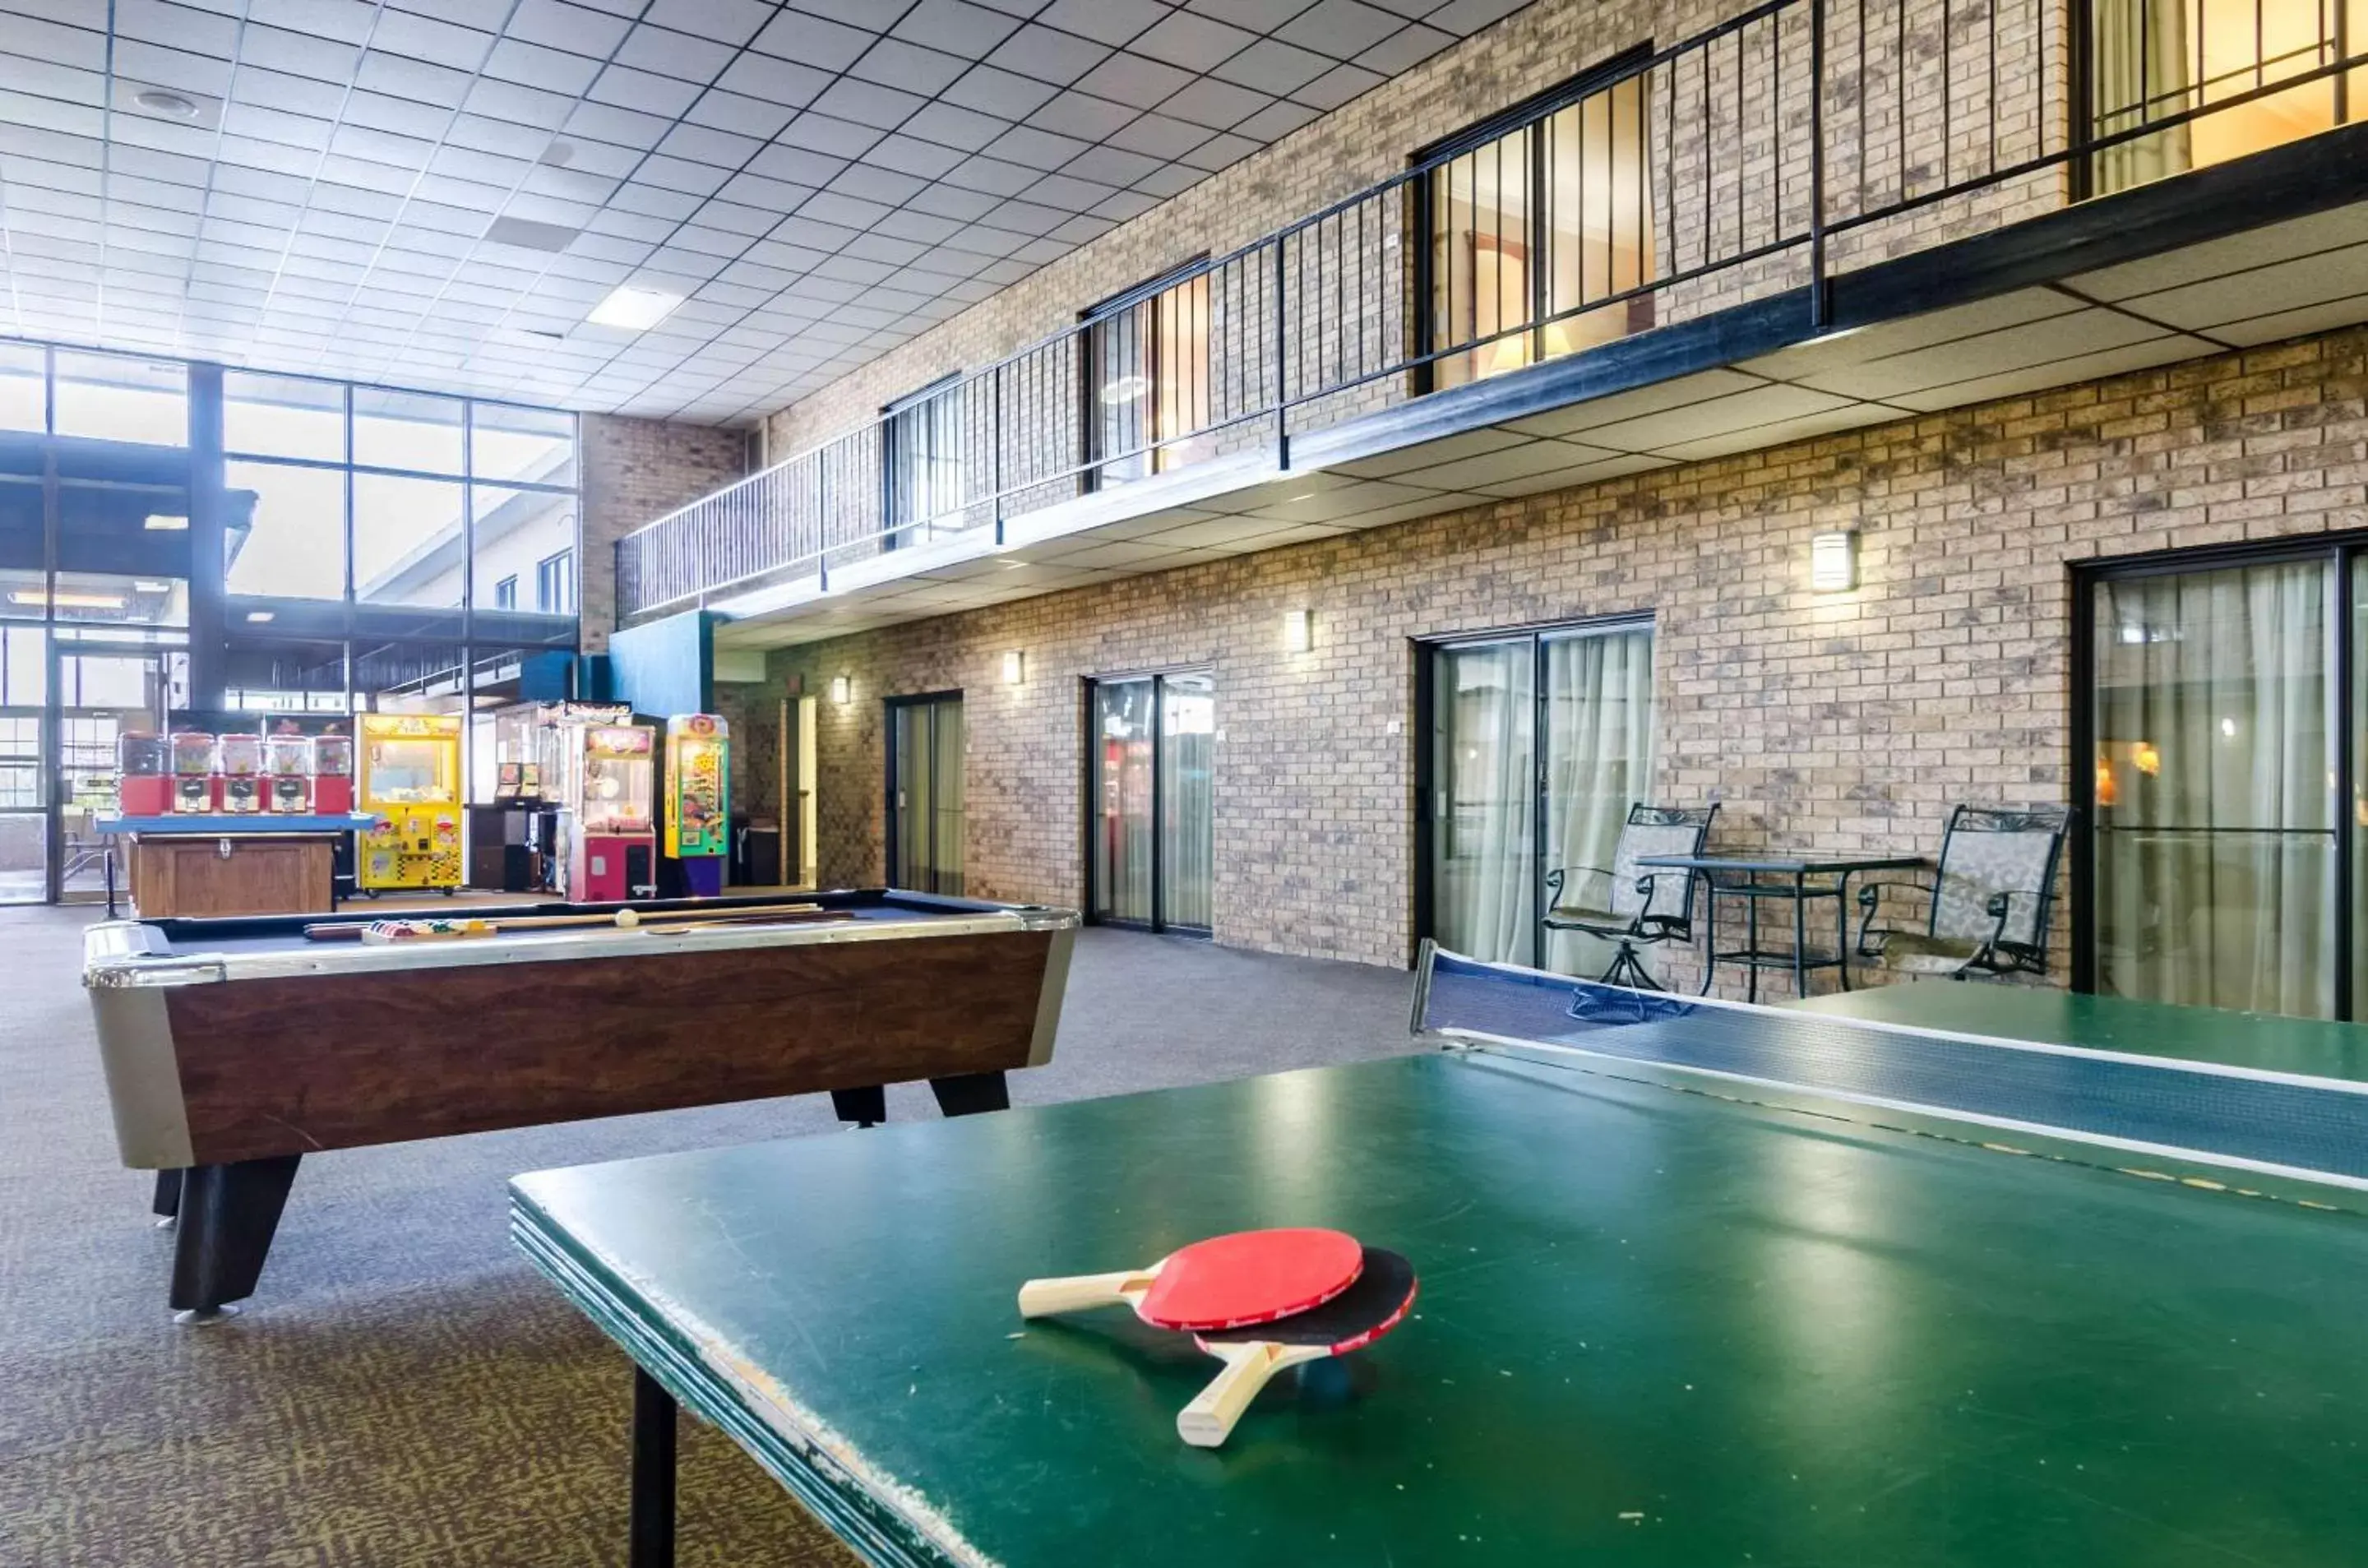 On site, Table Tennis in Quality Inn & Suites Salina